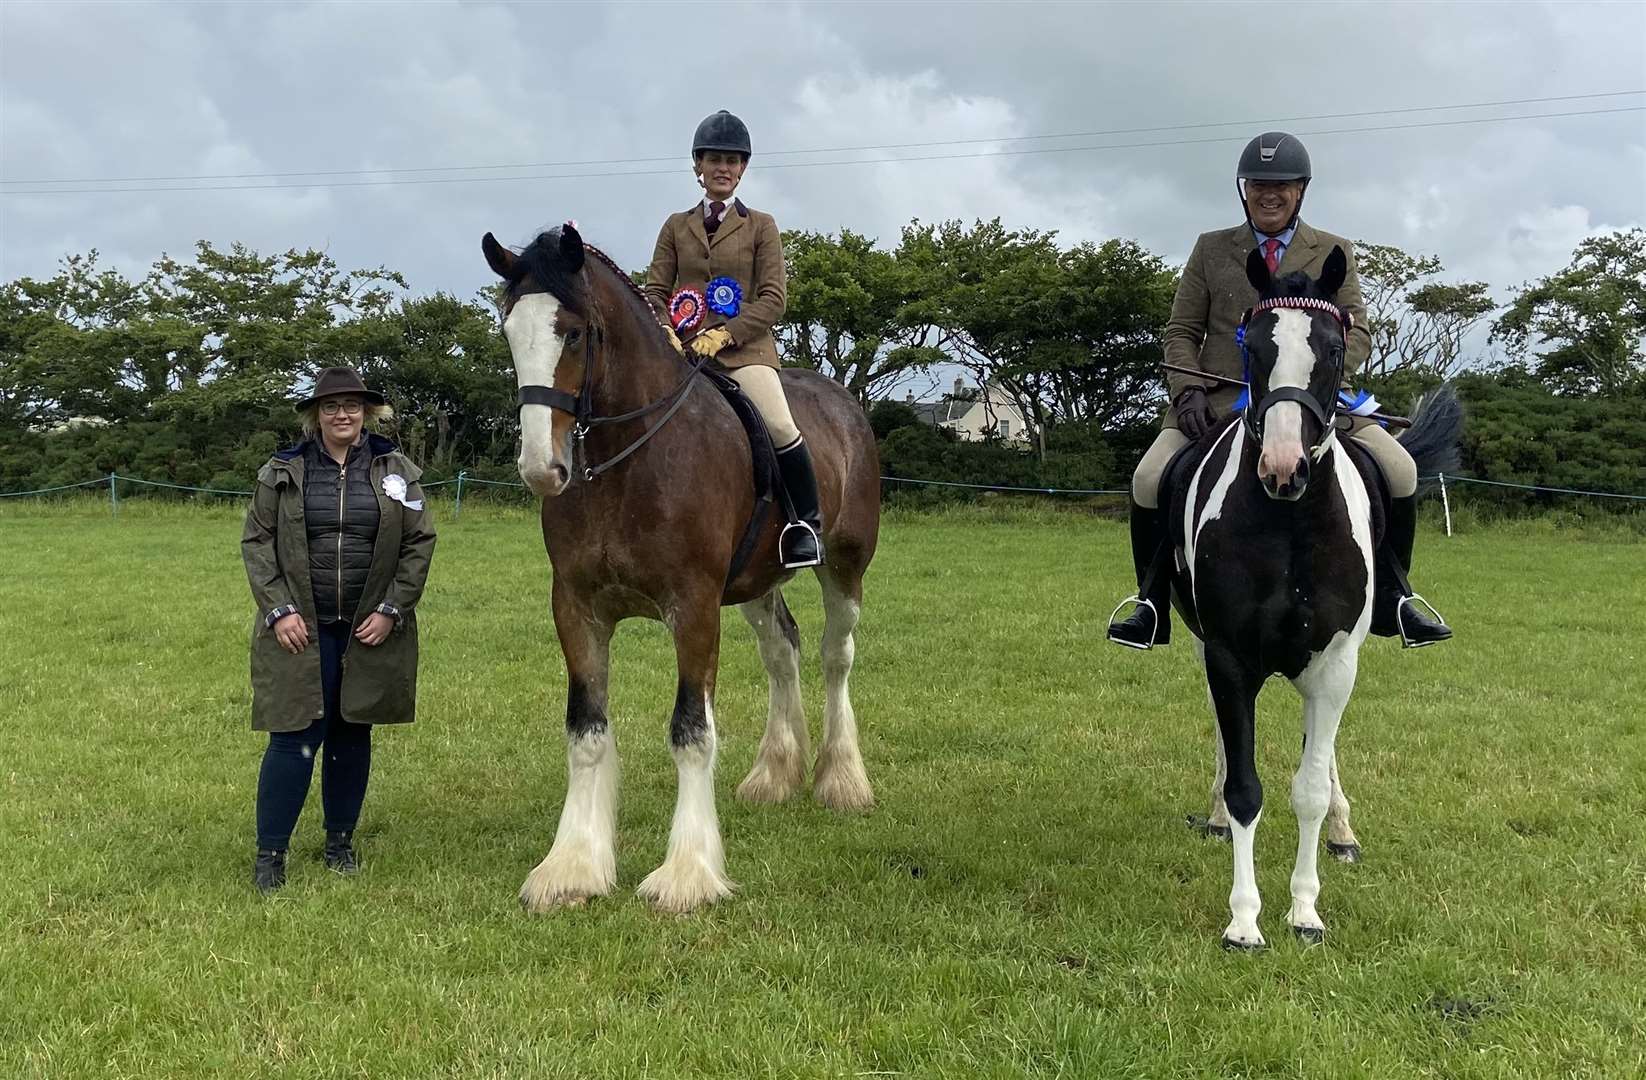 Ridden champion Isla Miller and her Clydesdale Ha Durran Harry, along with reserve James Munro riding Independent Boy and judge Susan Noble.